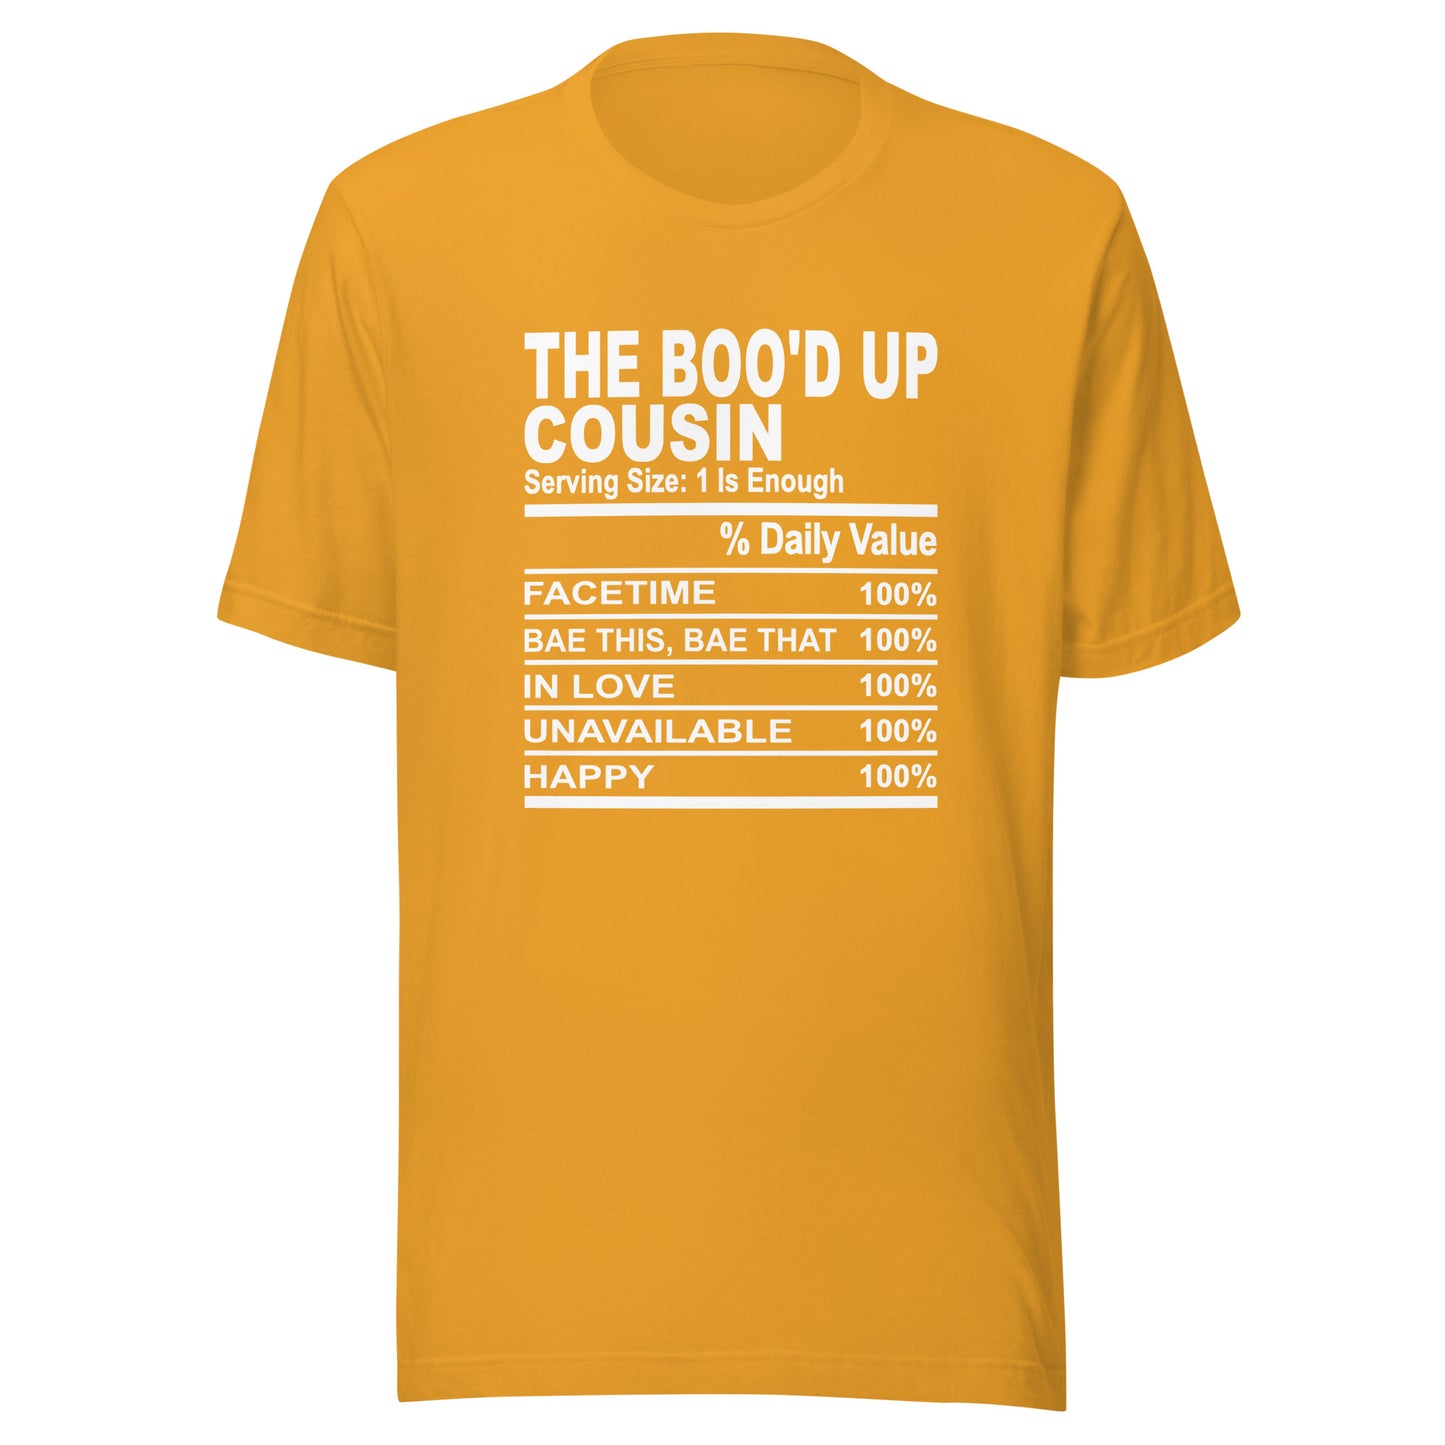 THE BOO'D UP COUSIN - S-M - Unisex T-Shirt (white print)